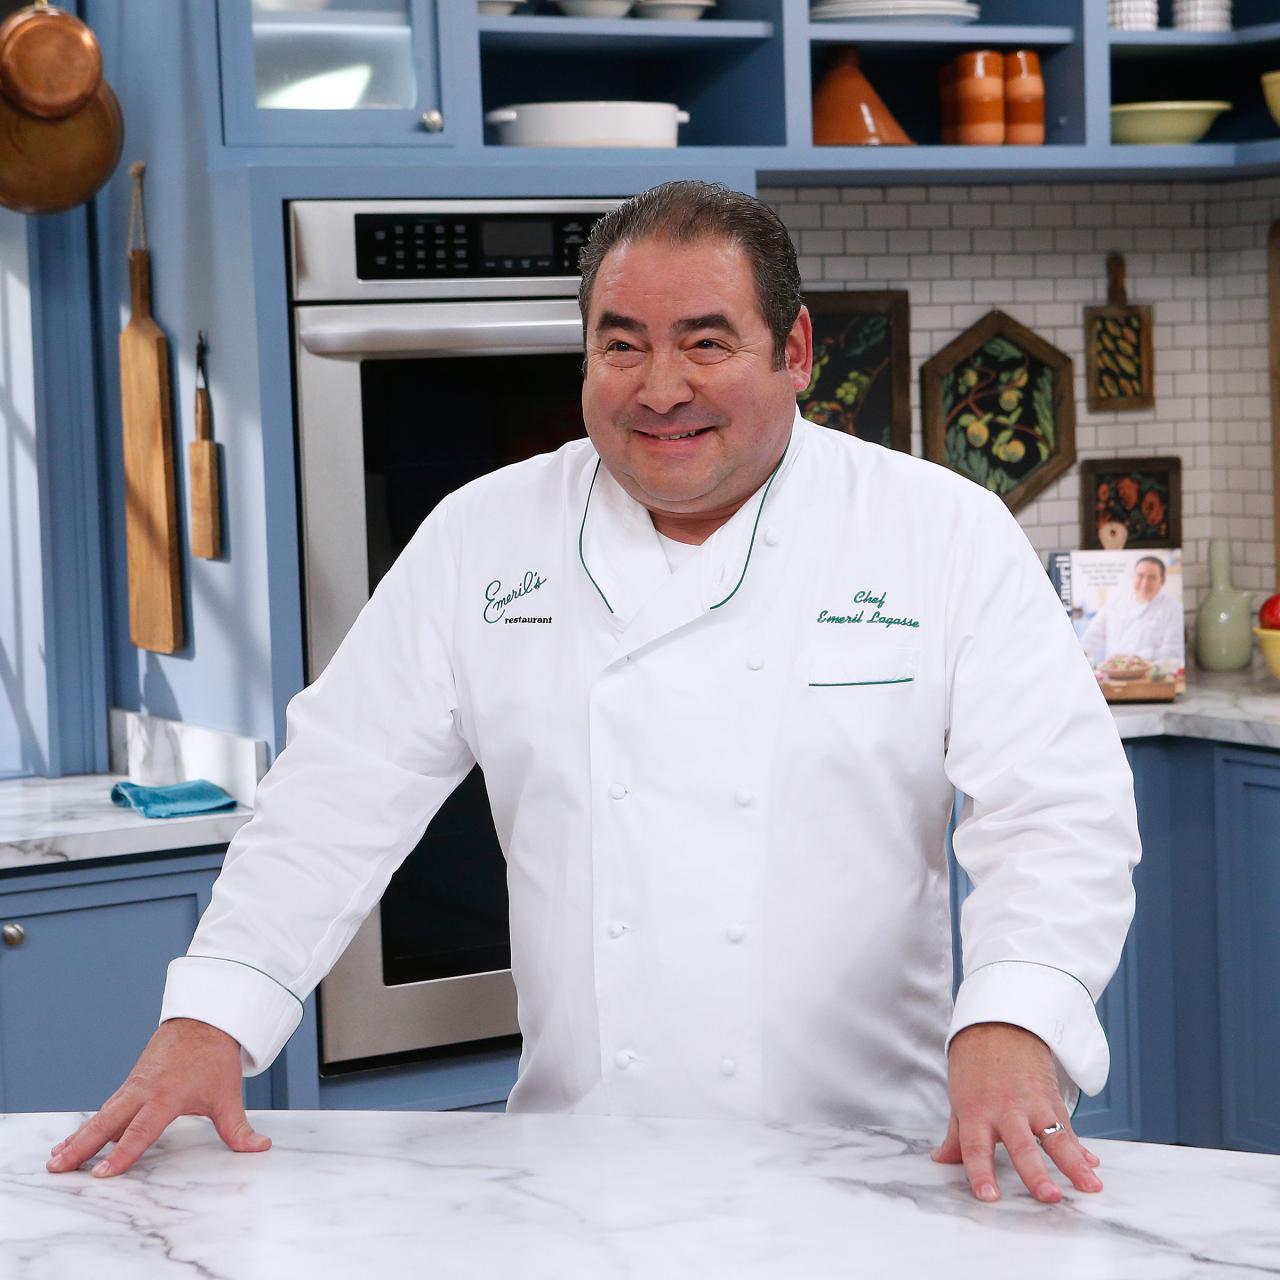 Emeril Lagasse Cookware: An Overview and Complete Review